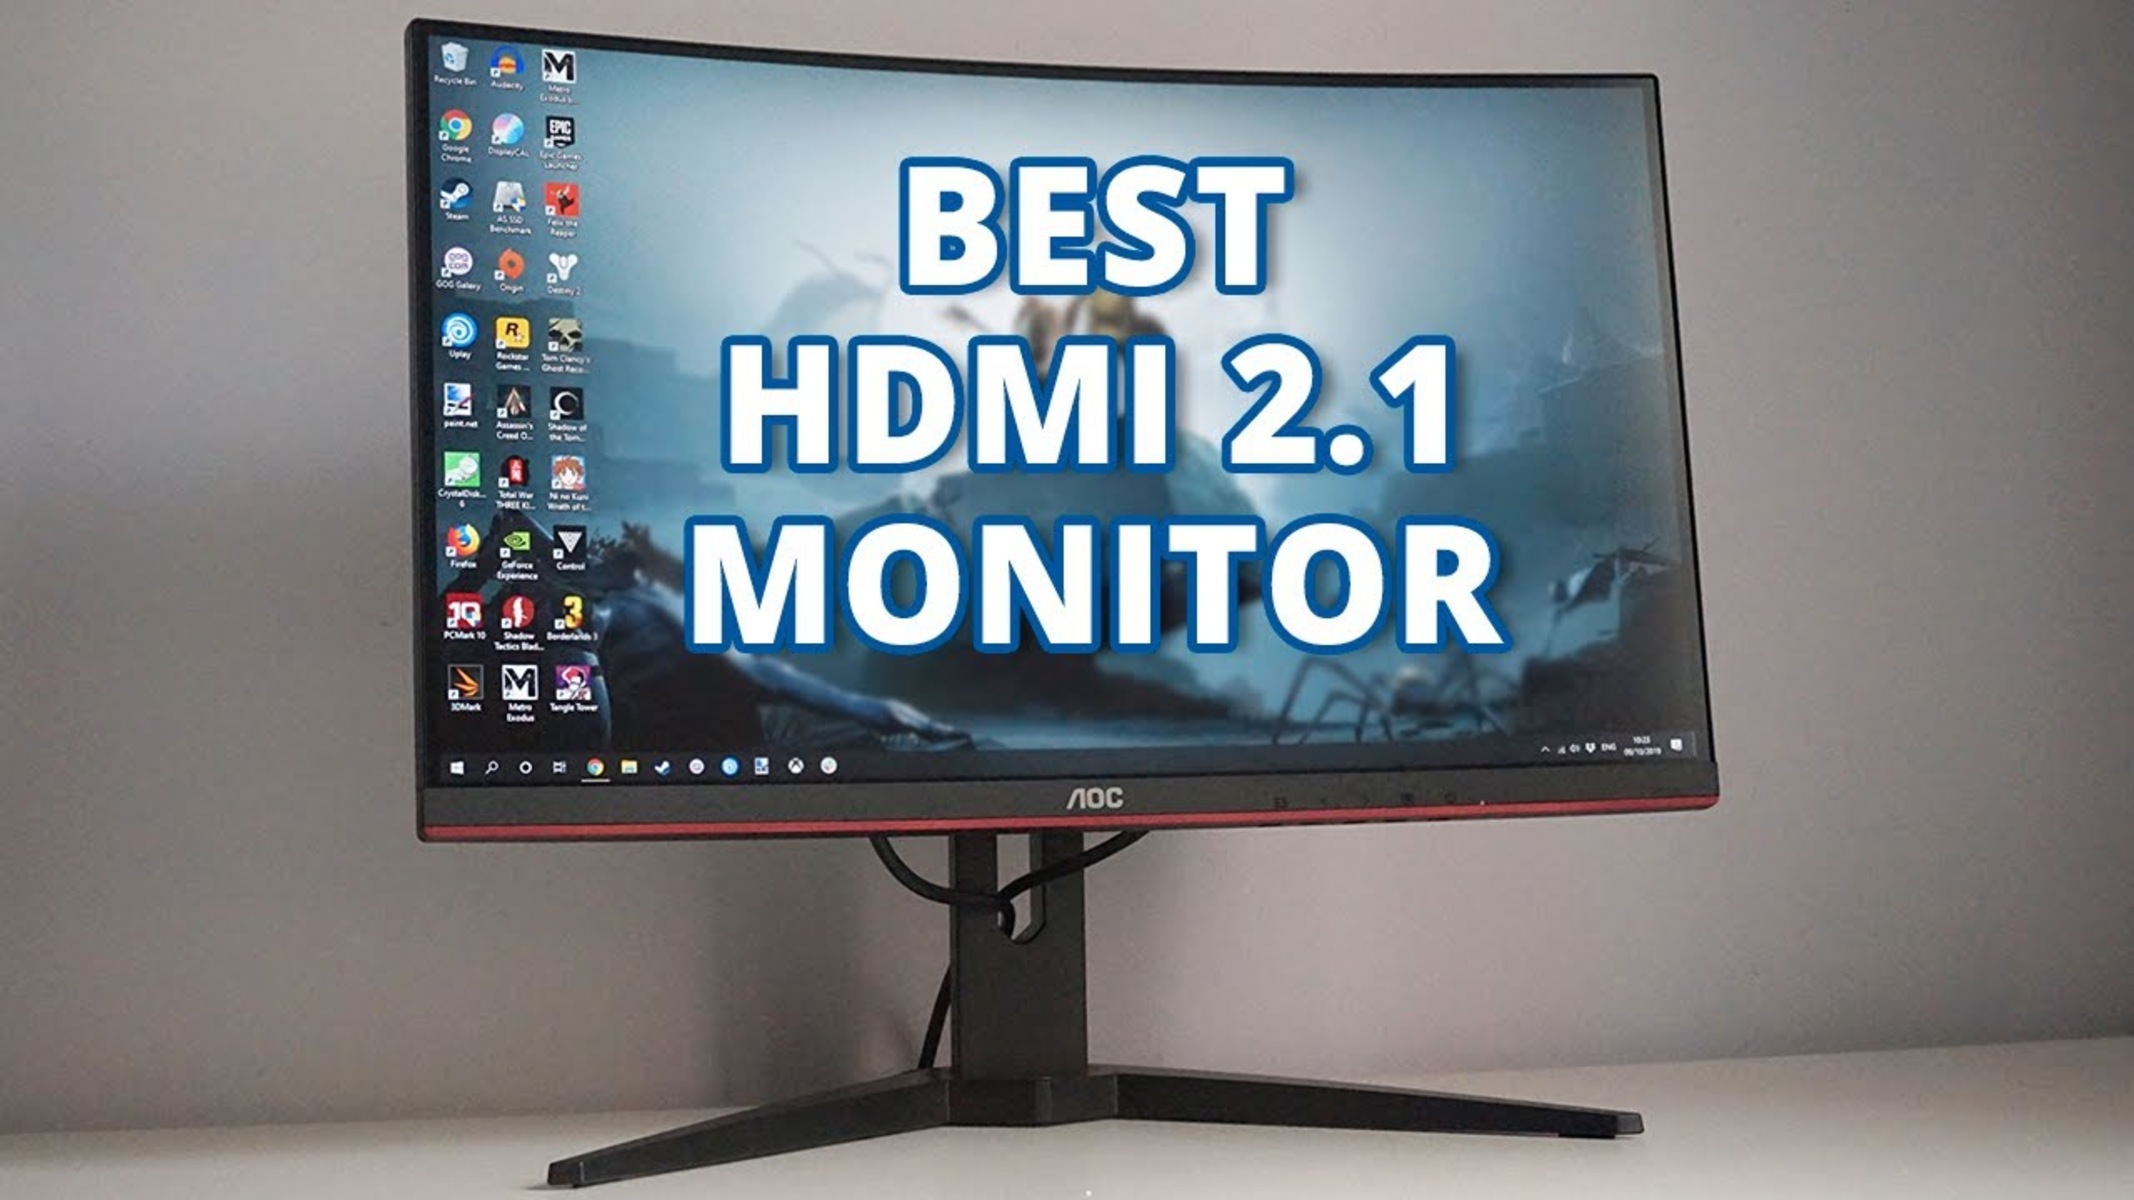 What Monitors Have HDMI 2.1